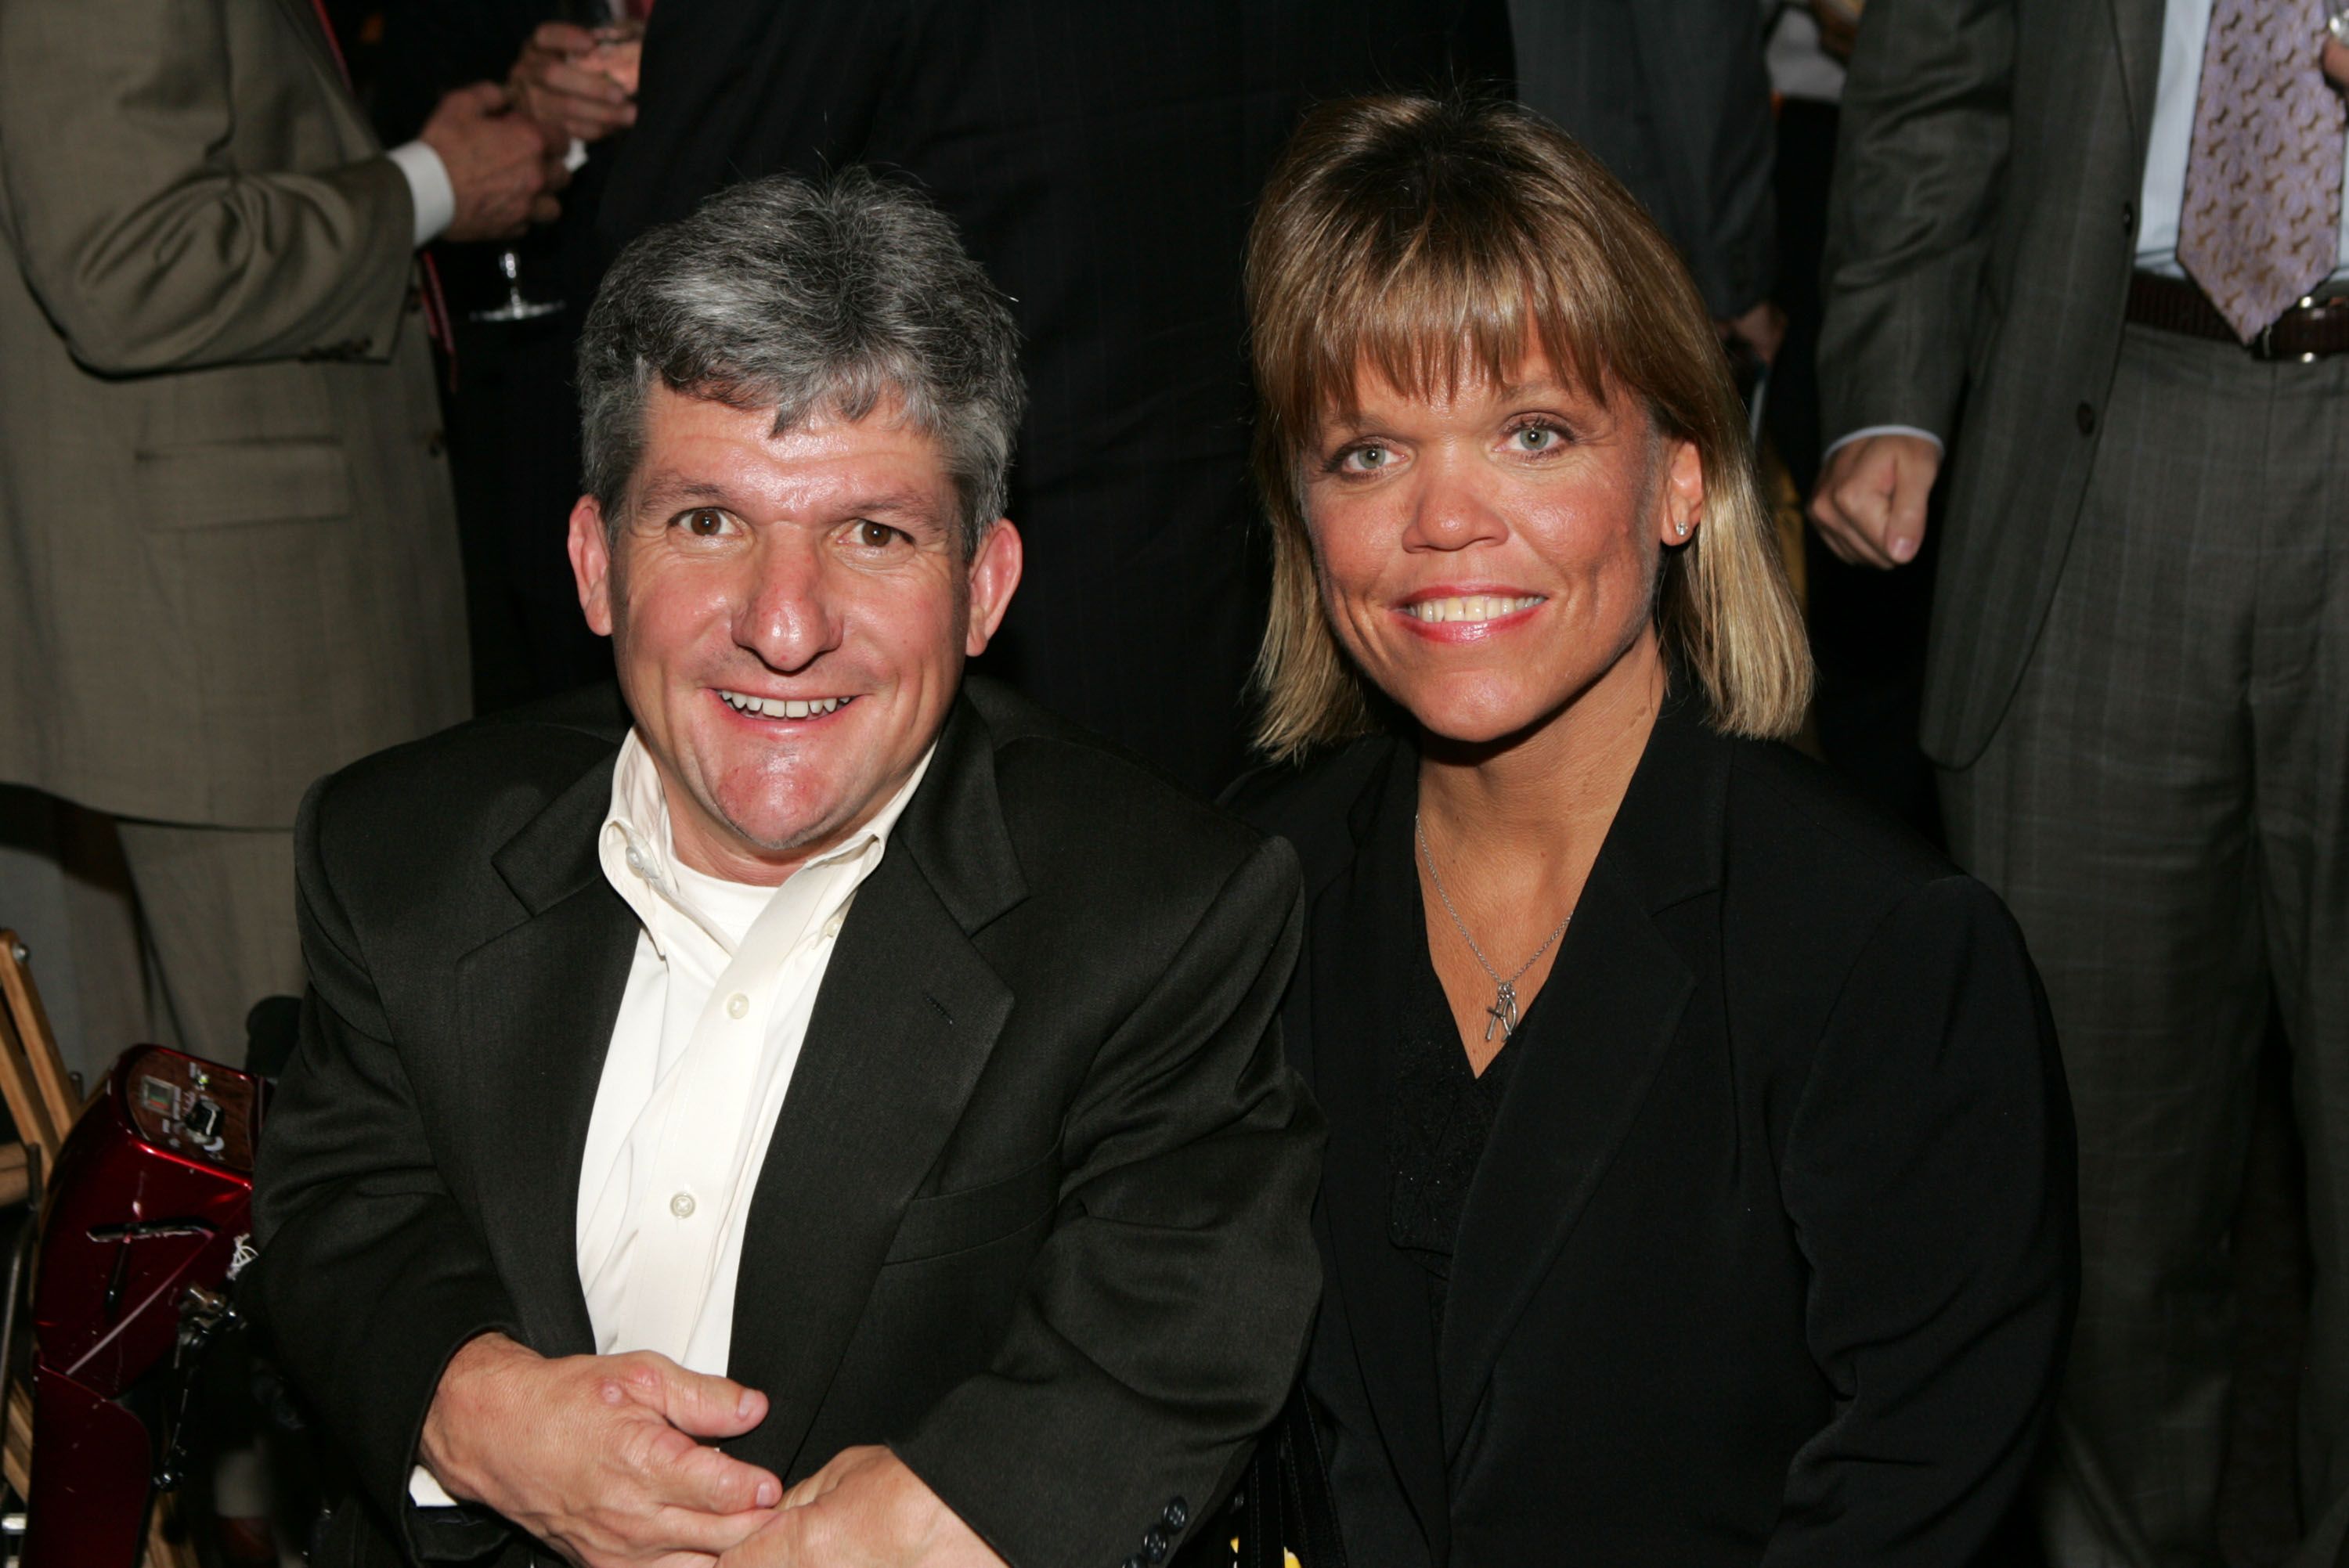 Matt and Amy Roloff at the Discovery Upfront Presentation NY - Talent Images on April 23, 2008, in New York City | Photo: Thos Robinson/Getty Images